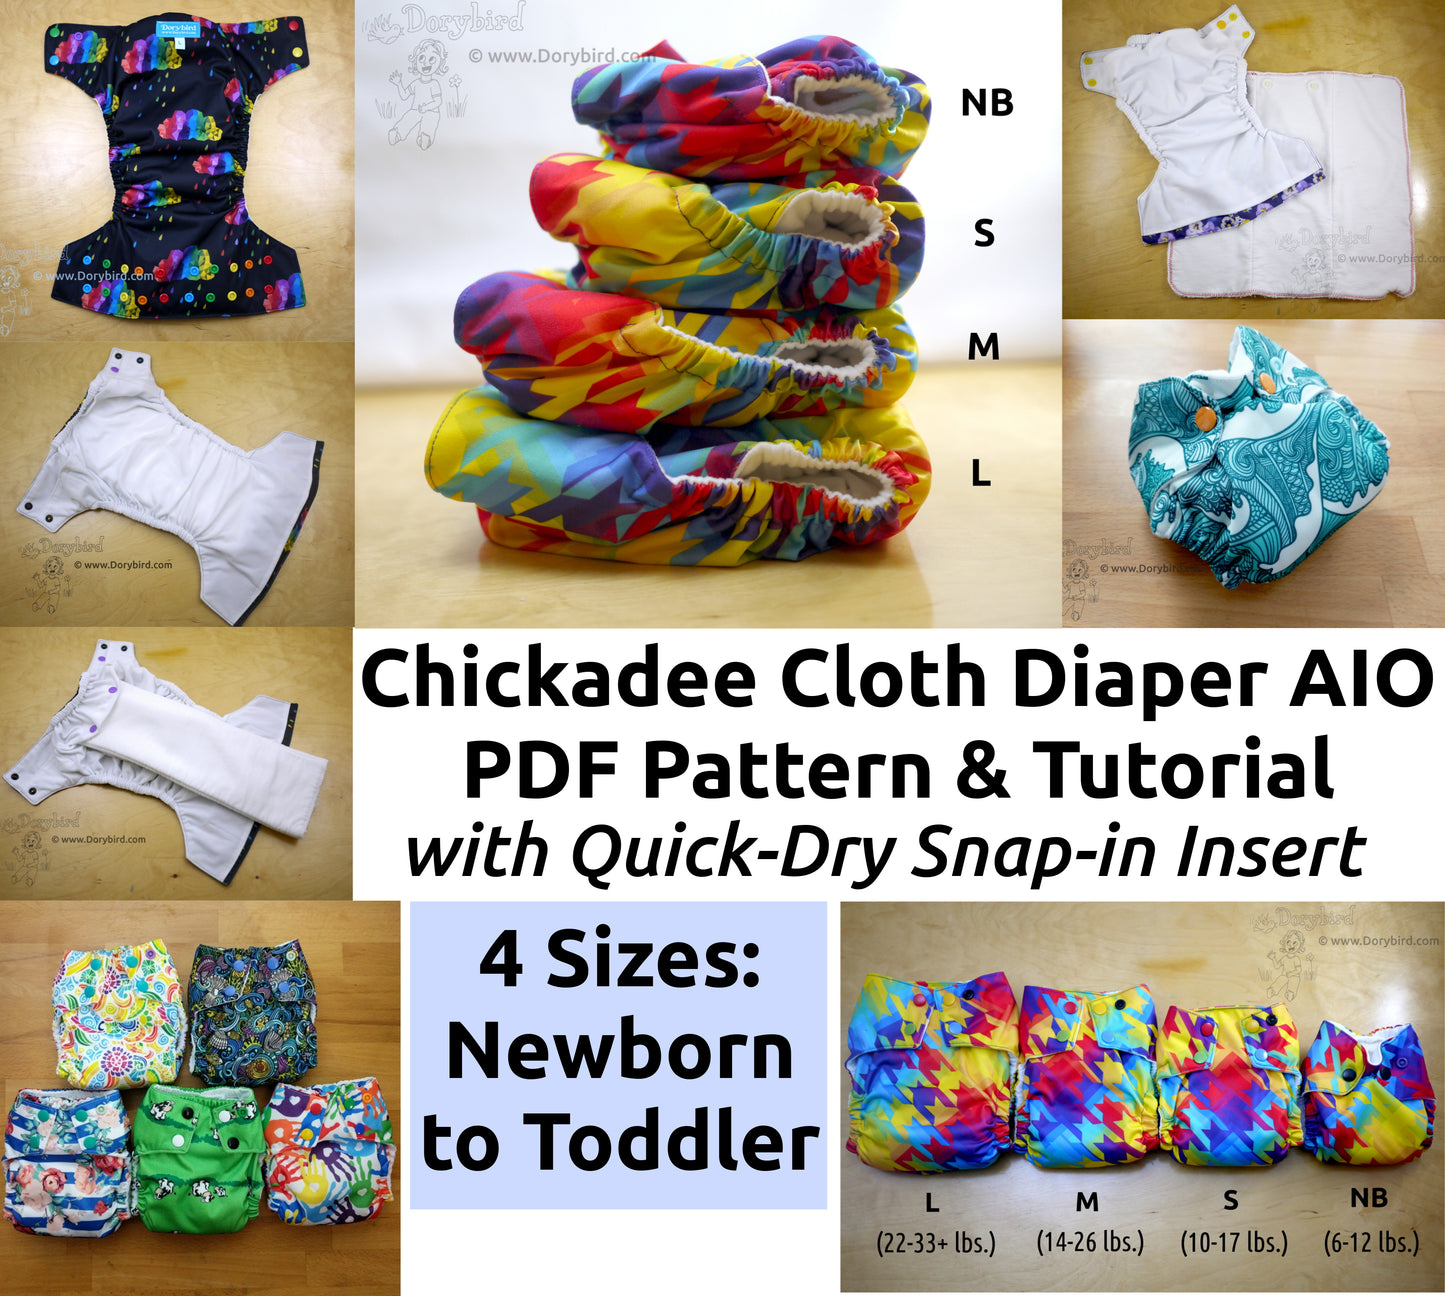 Chickadee Cloth Diapers, PDF sewing pattern, digital download, printable pattern and tutorial for sized AIOs in 4 sizes: Newborn, Small, Medium, Large, by Dorybird Baby